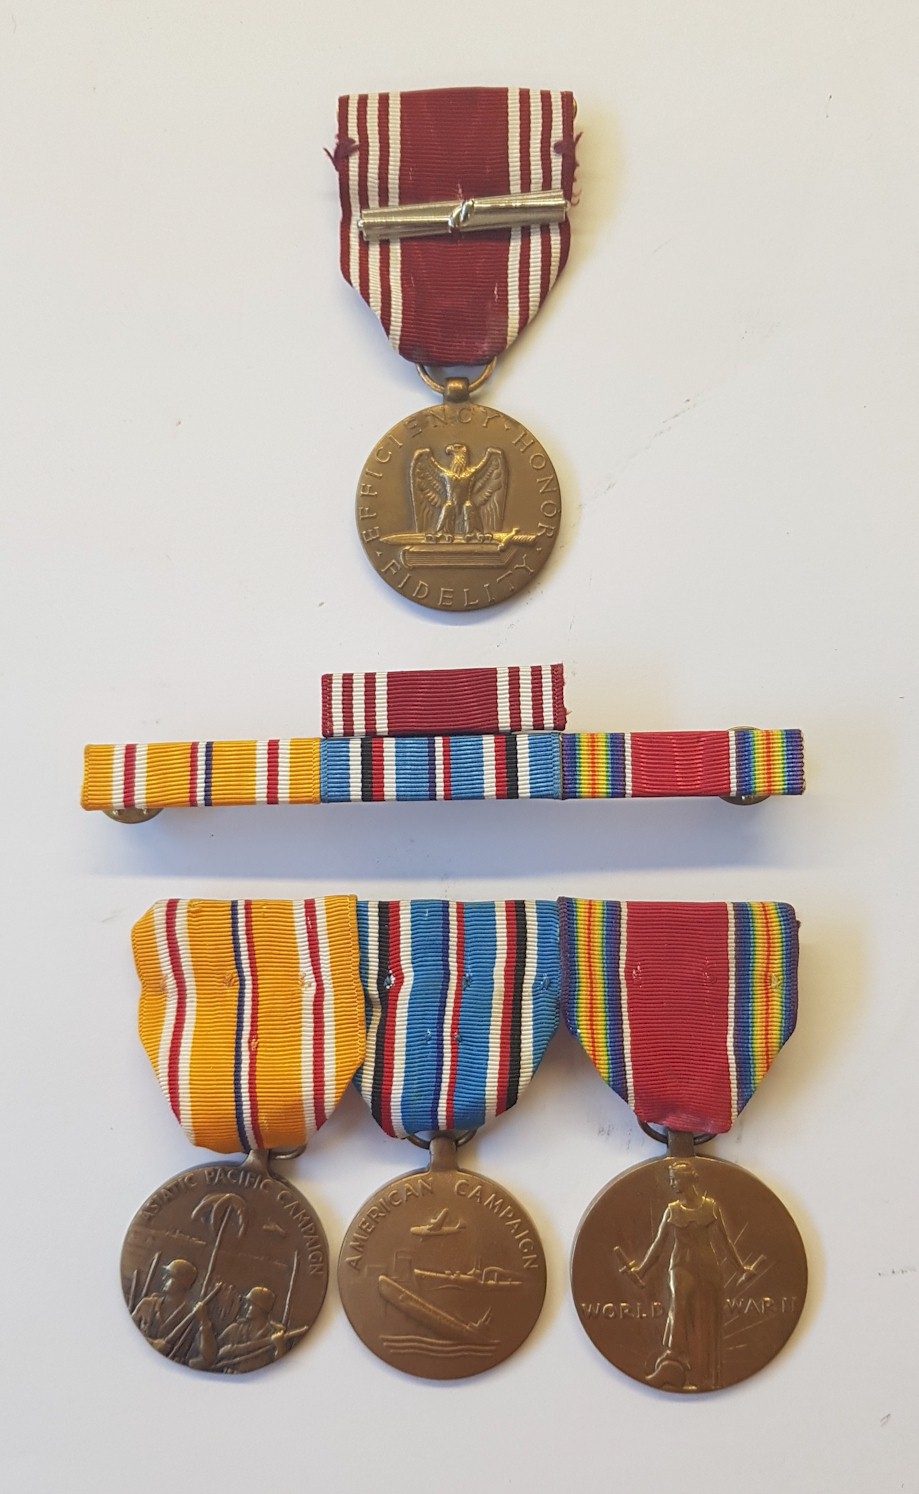 AMERICAN WWII GROUP AWARDS "ABBO KENT "